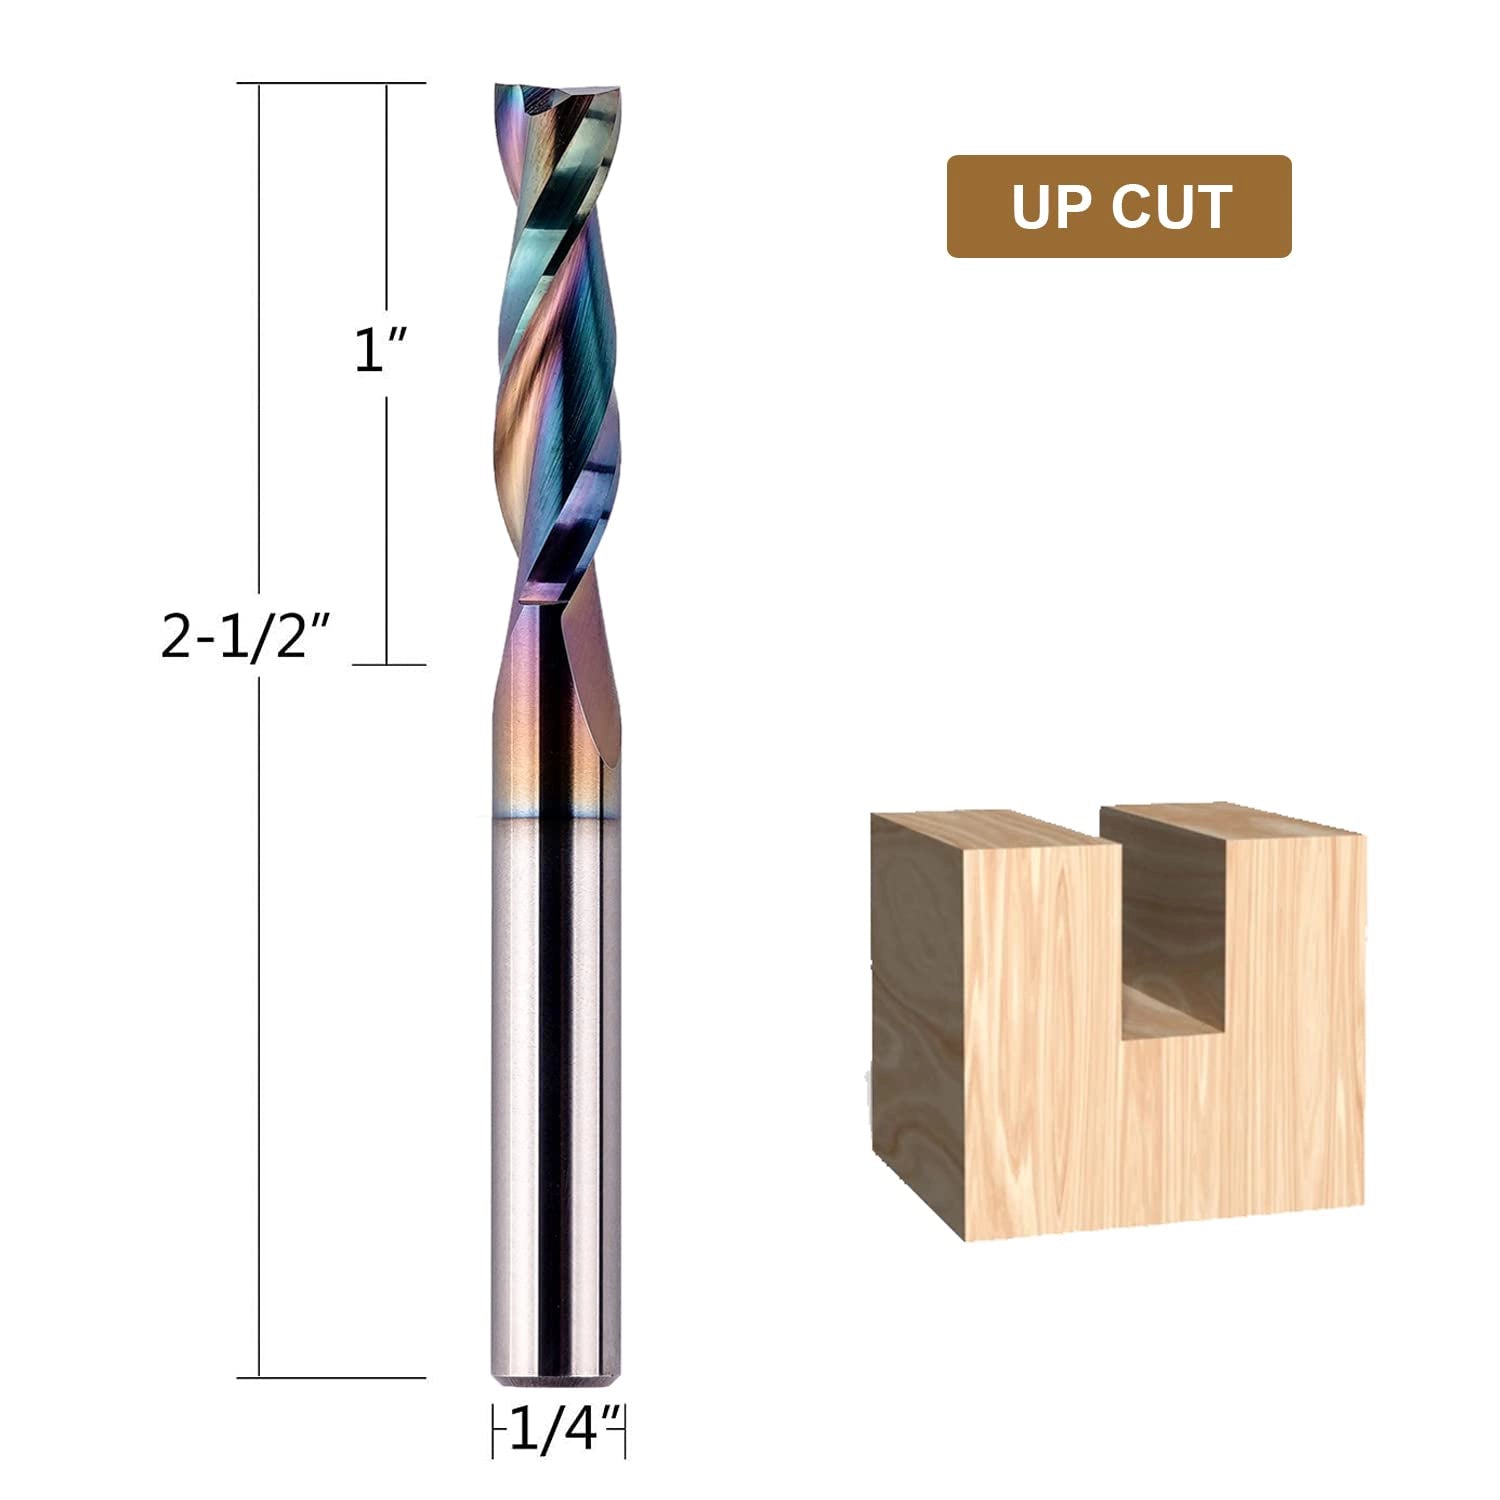 SpeTool SPE-X Coated 1/4" Dia Up Cut Router Bit CNC Carbide End Mill